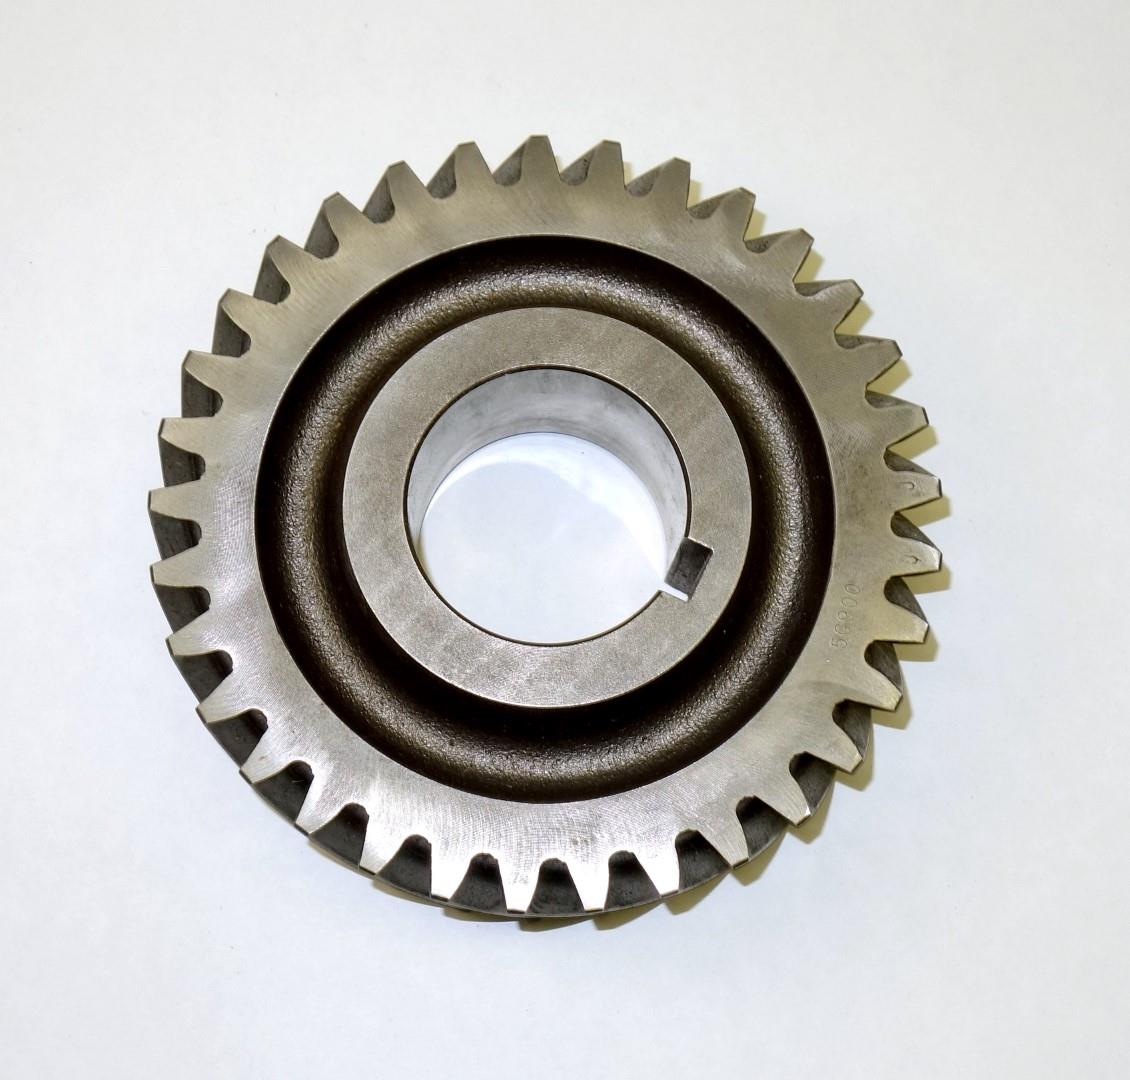 M35-658 | 3020-00-312-8350 Rear Driven Output Shaft Gear for Transfer Case for M35A2 Series with Multi Fuel Engine NOS (1).JPG